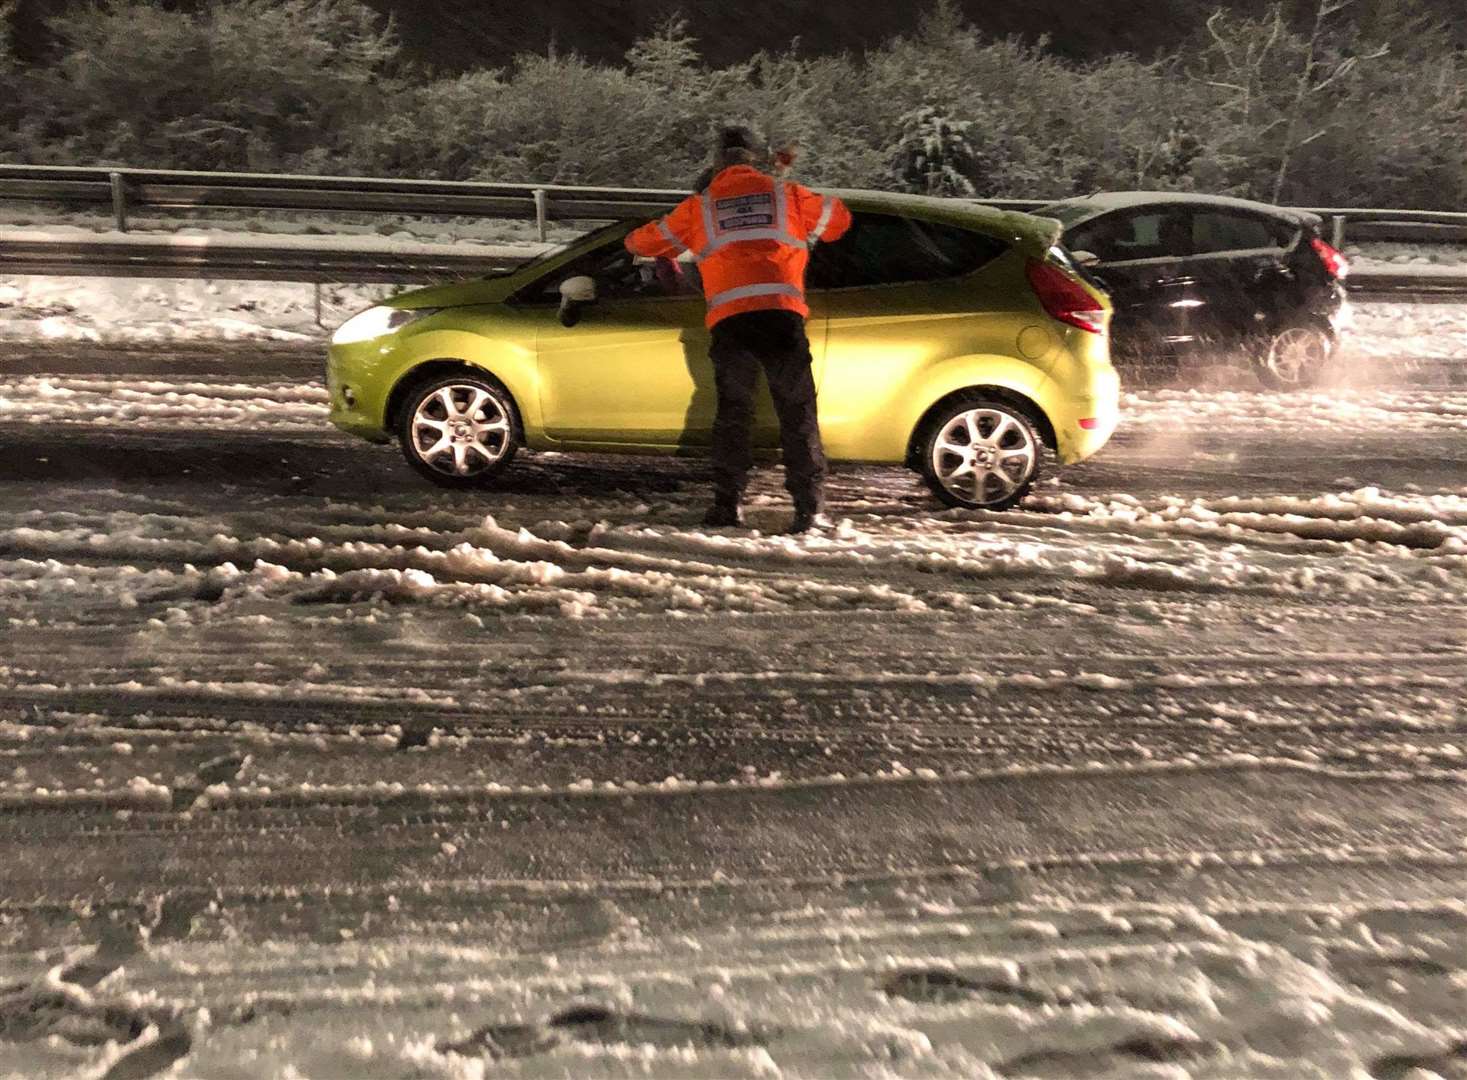 South East 4x4 Response worked through the night to help drivers across the county (6927707)